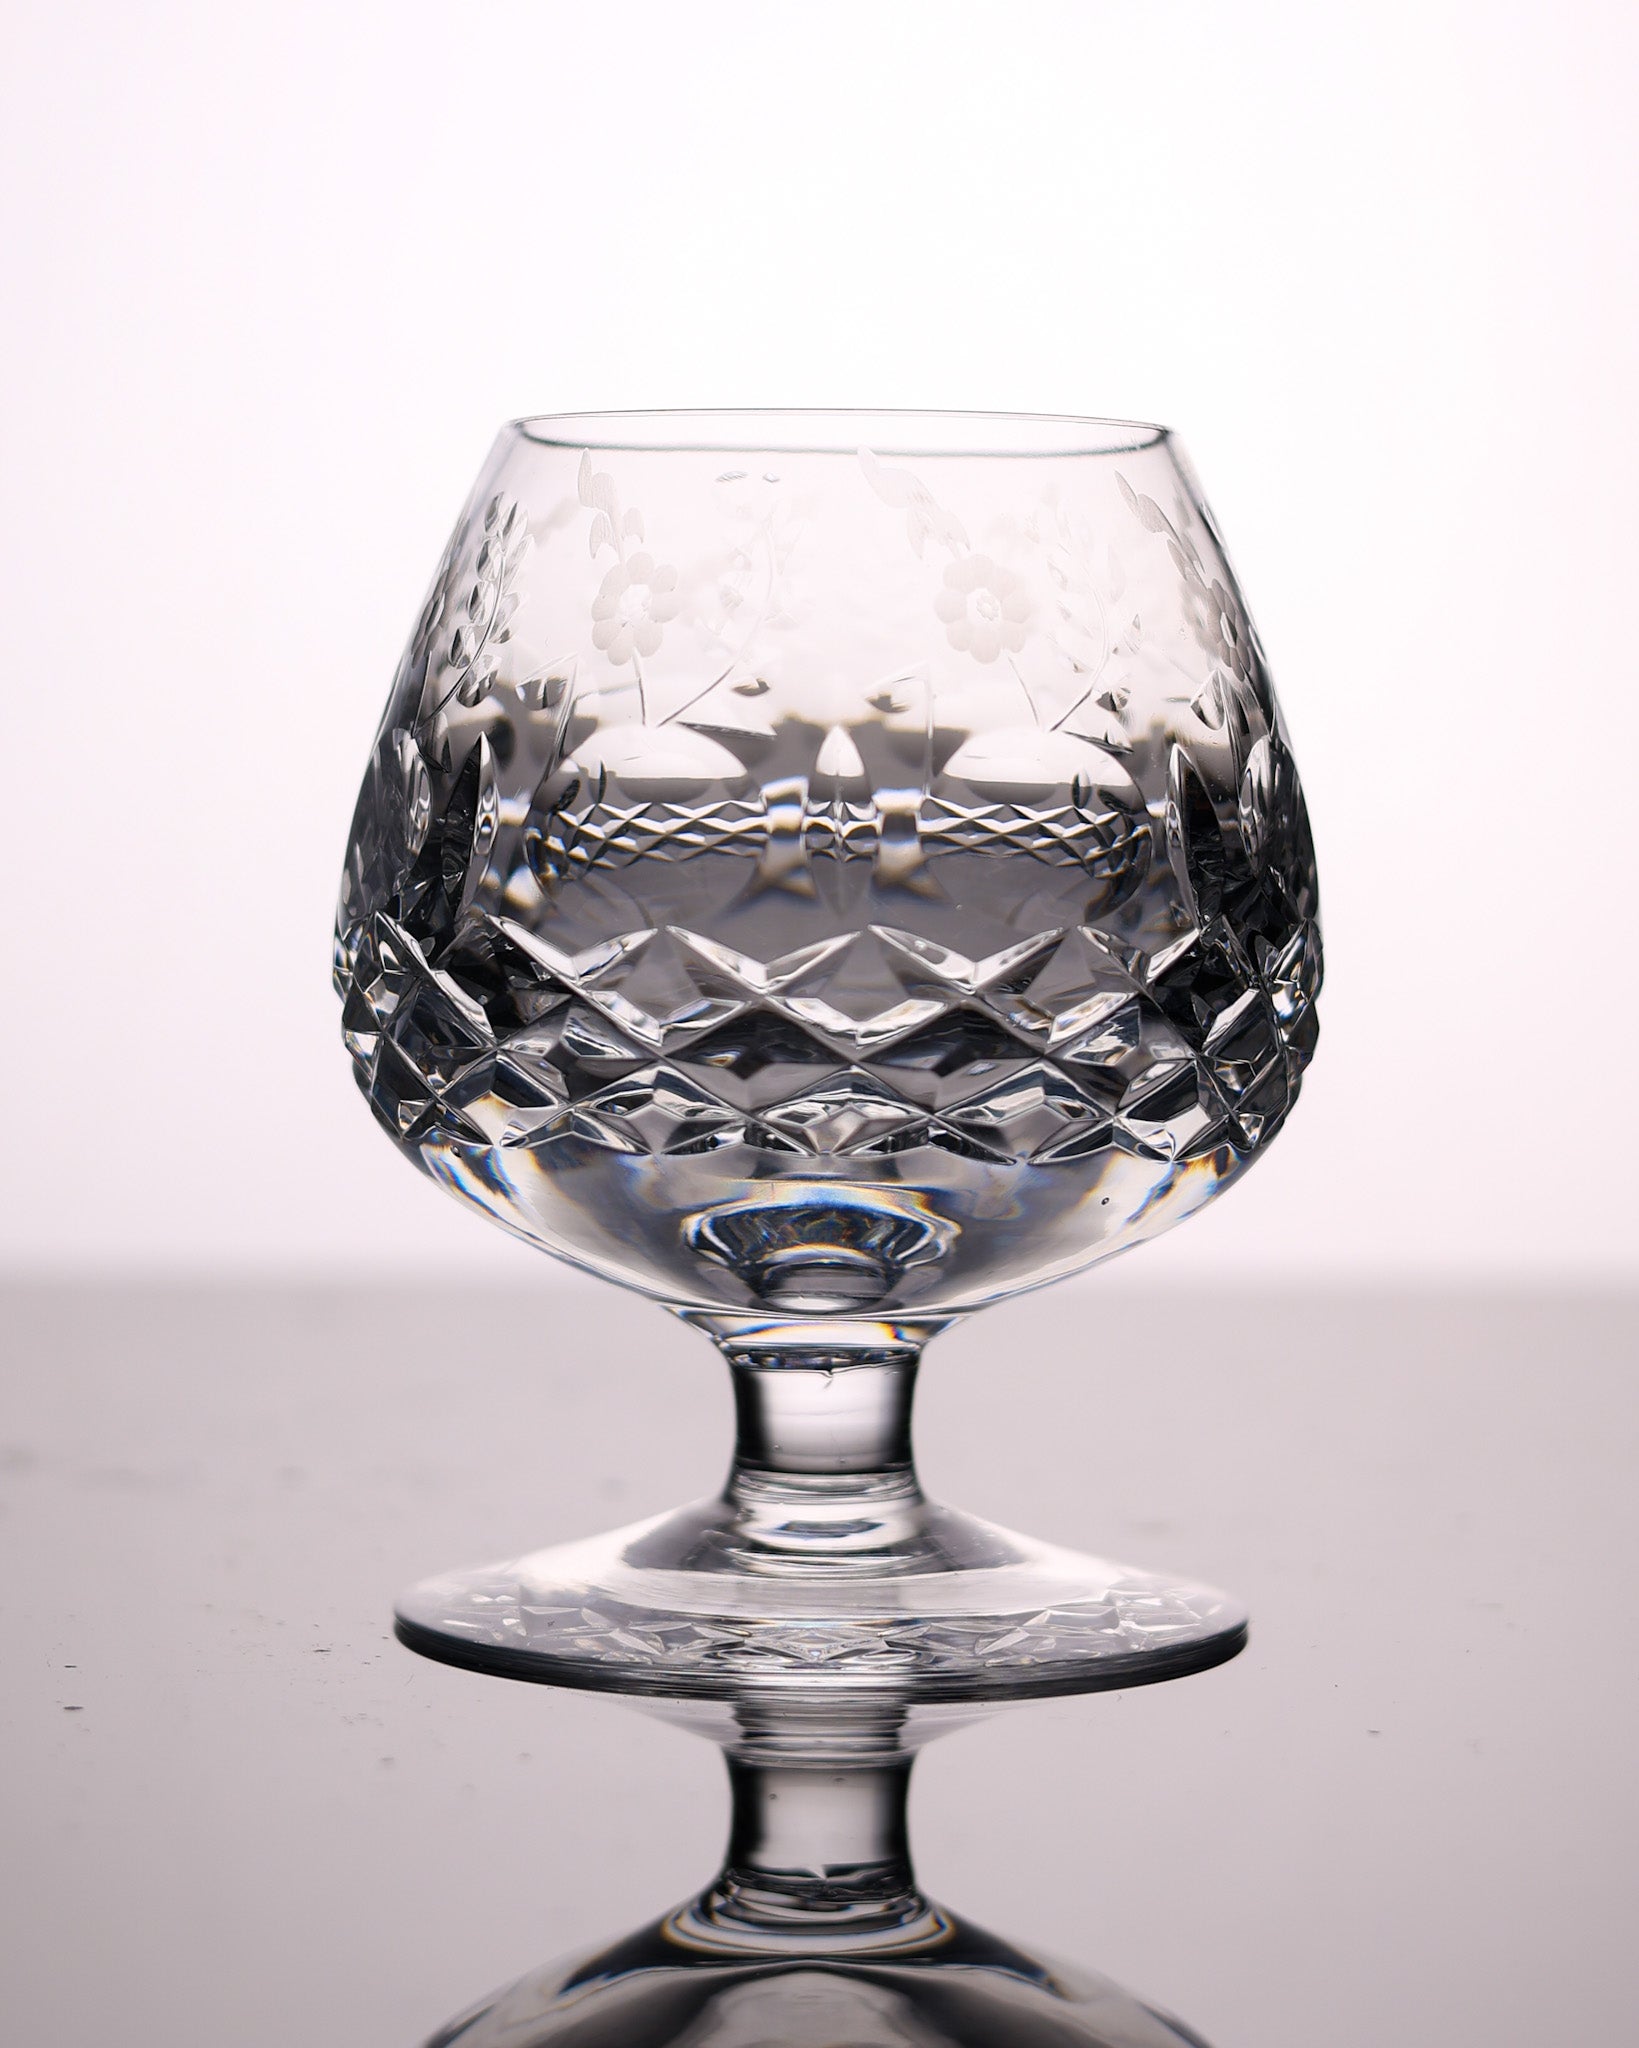 Weighted Hand-Cut Brandy Cognac Whiskey Snifter - 8oz